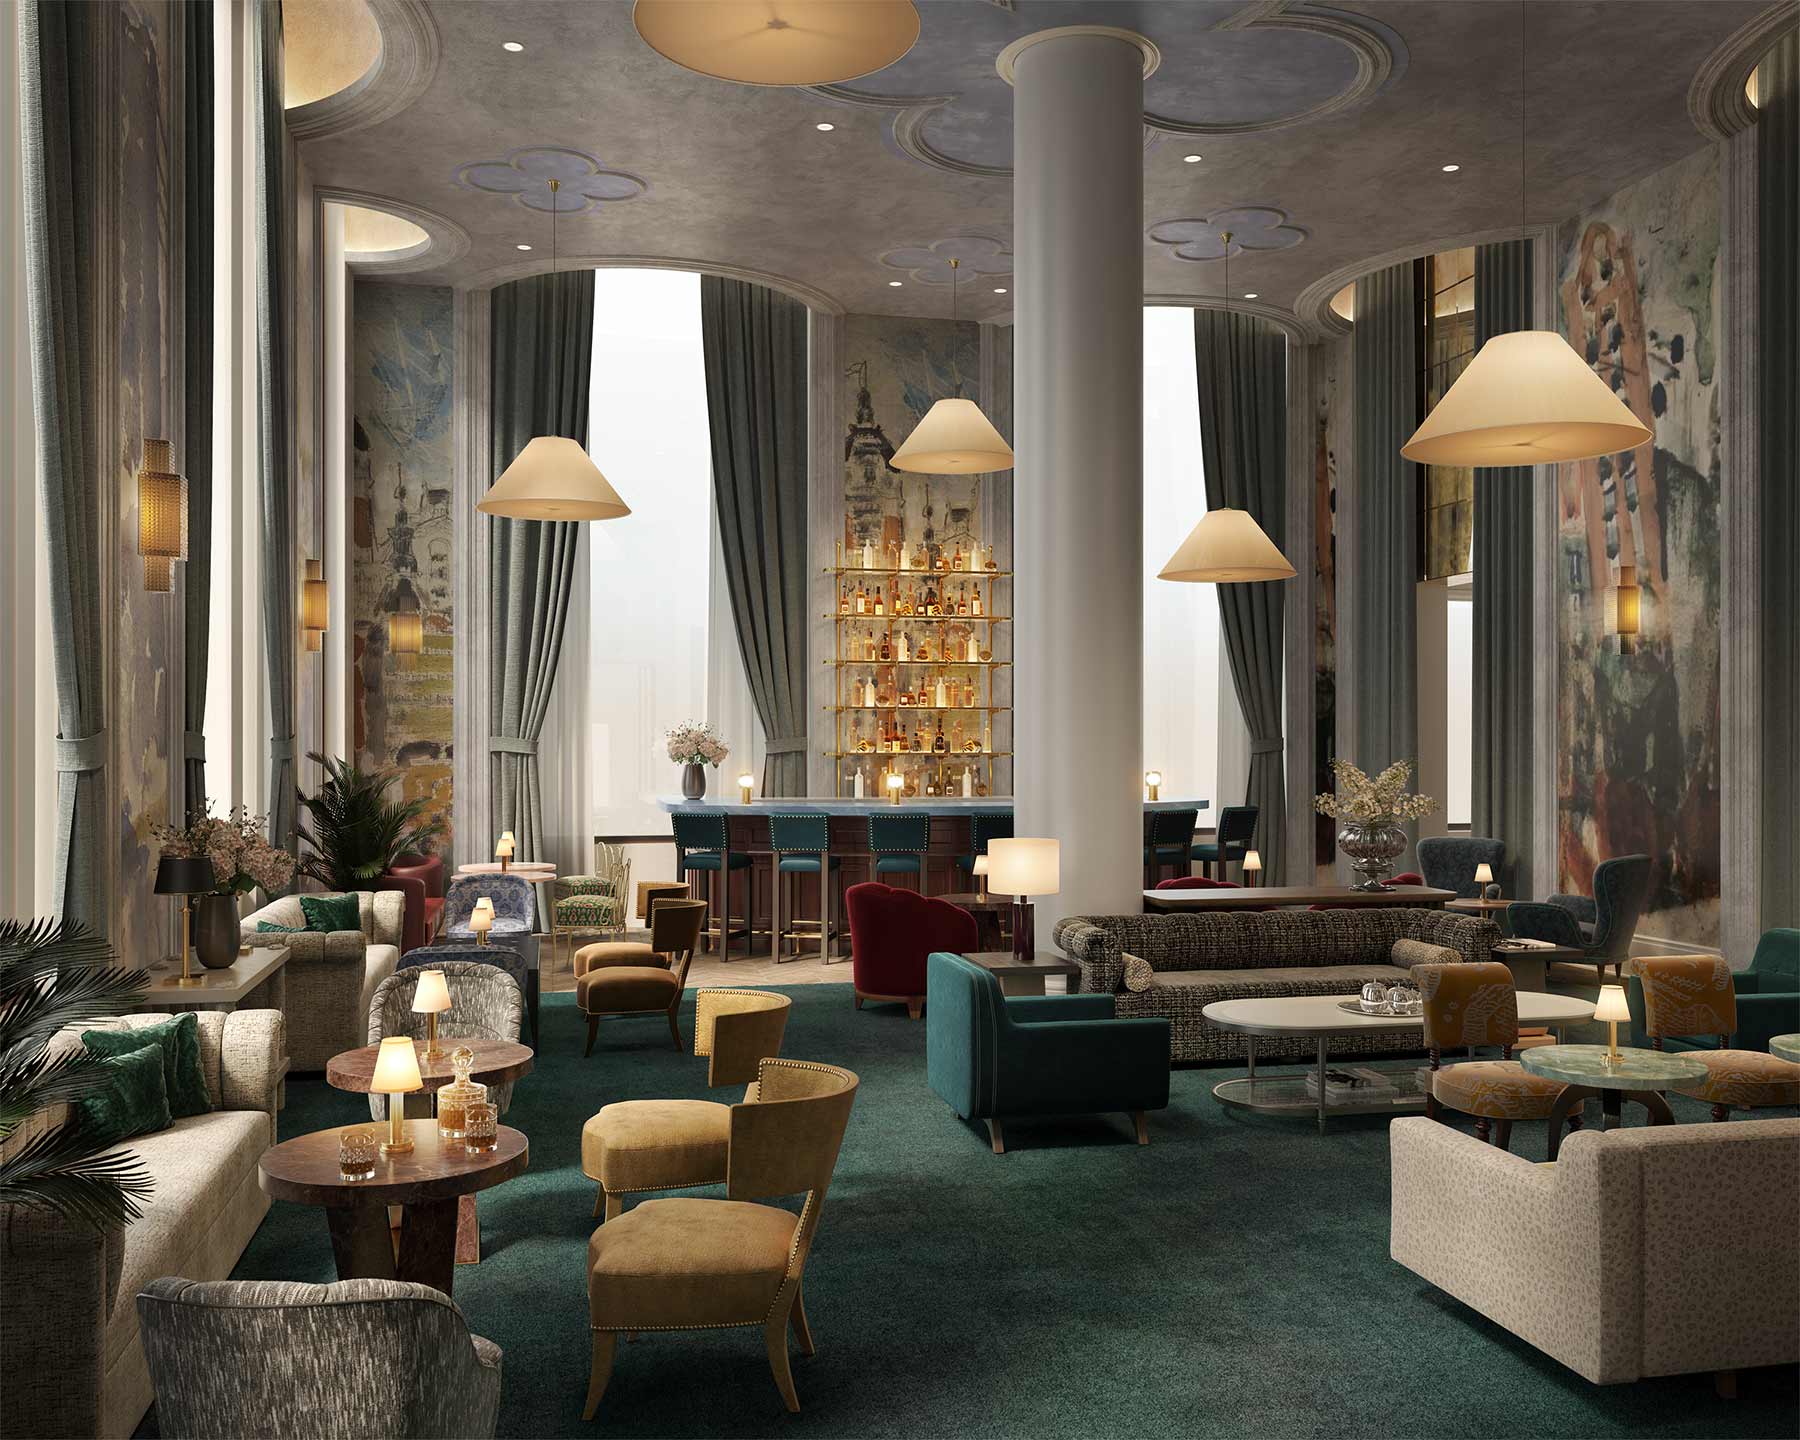 Luxury hotels opening in New York City in 2022 - The Wall Street Hotel 